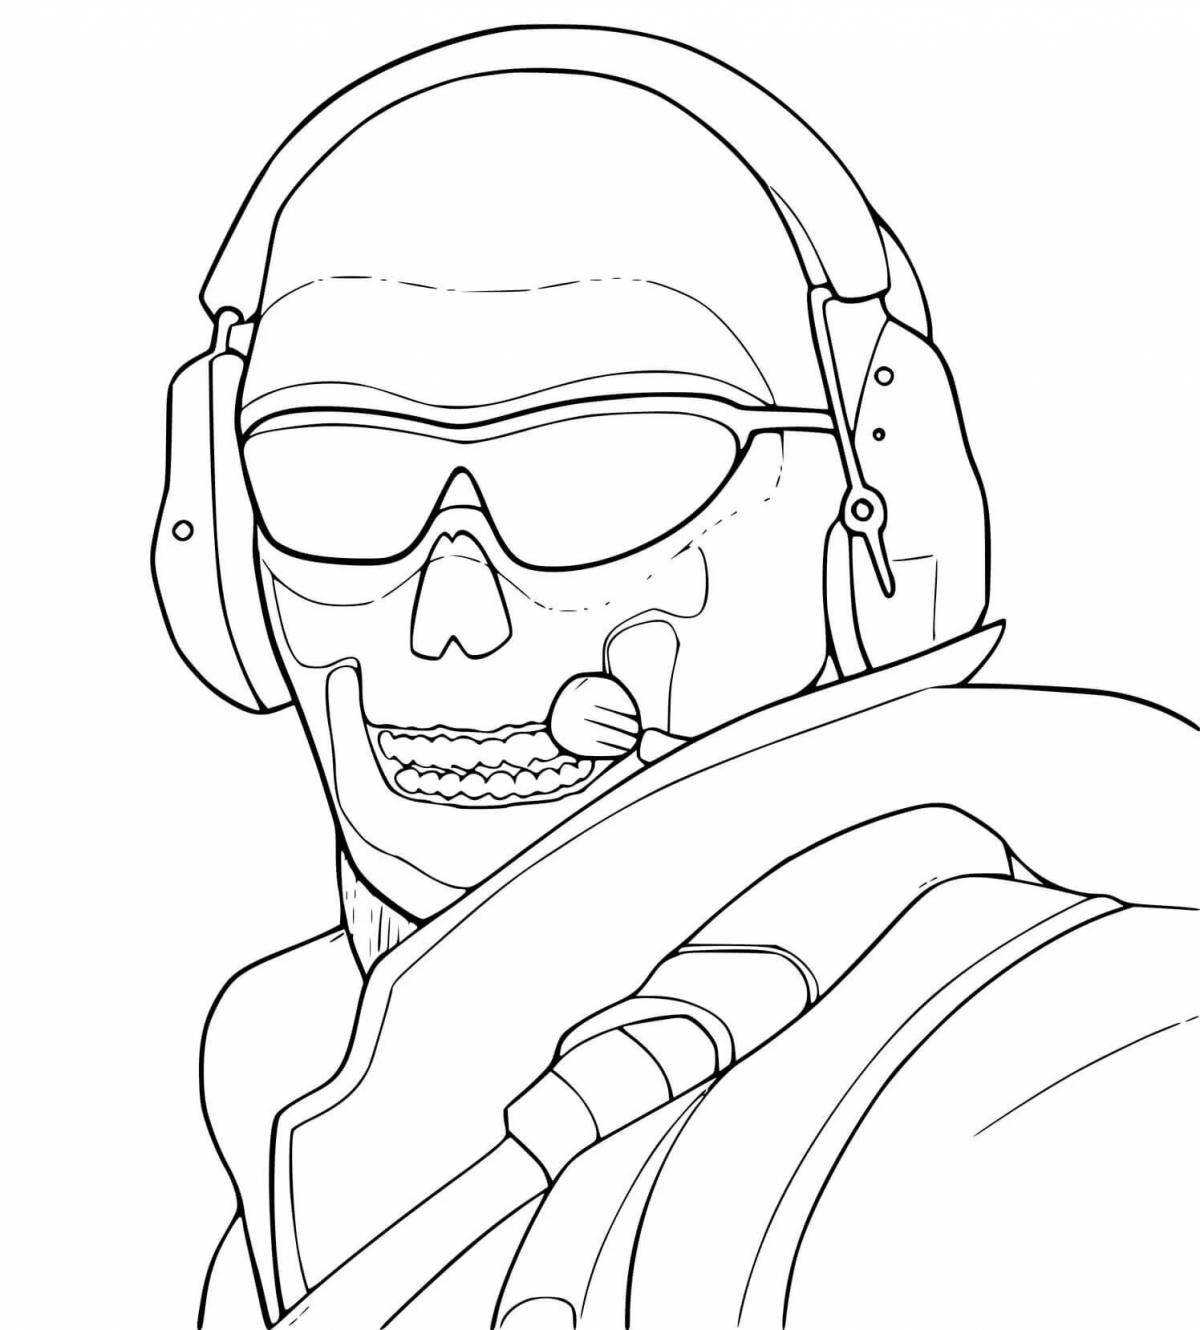 Radiant standoff 2 logo coloring page